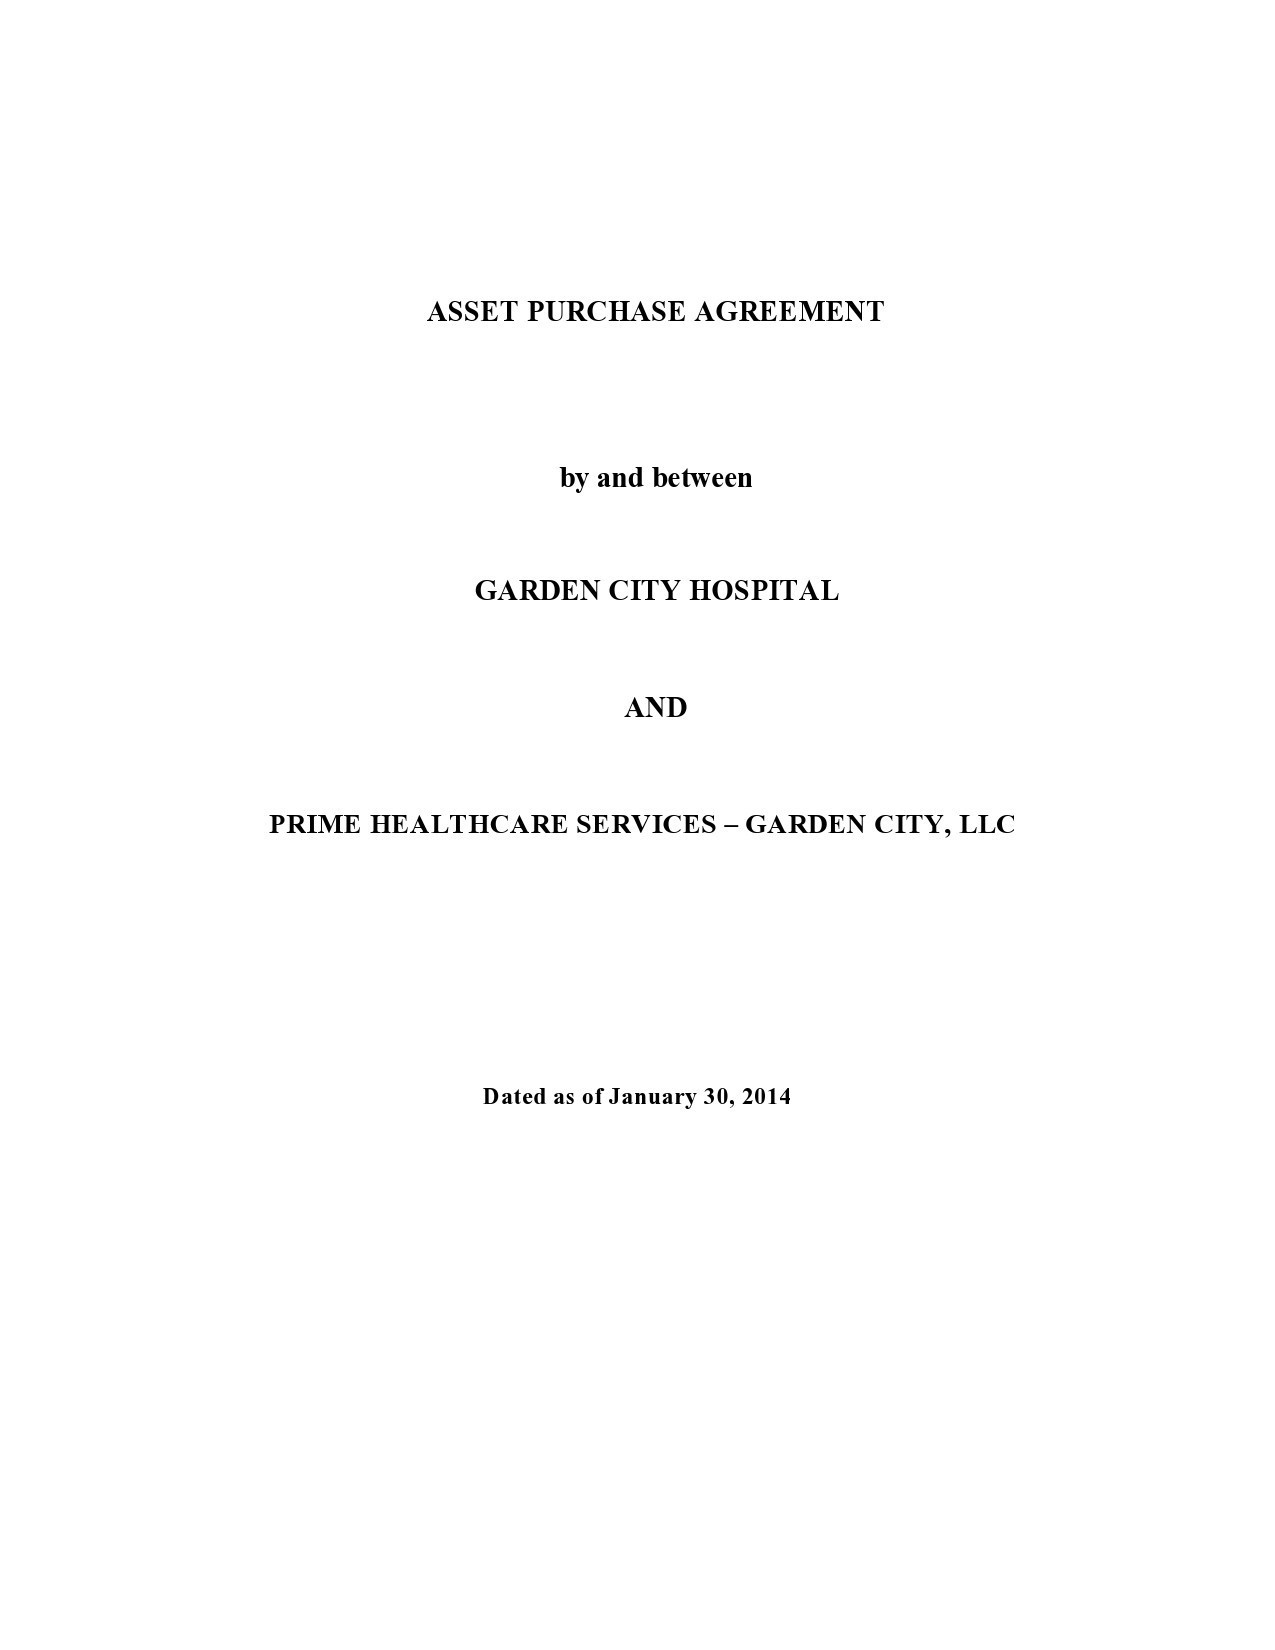 Free asset purchase agreement 39